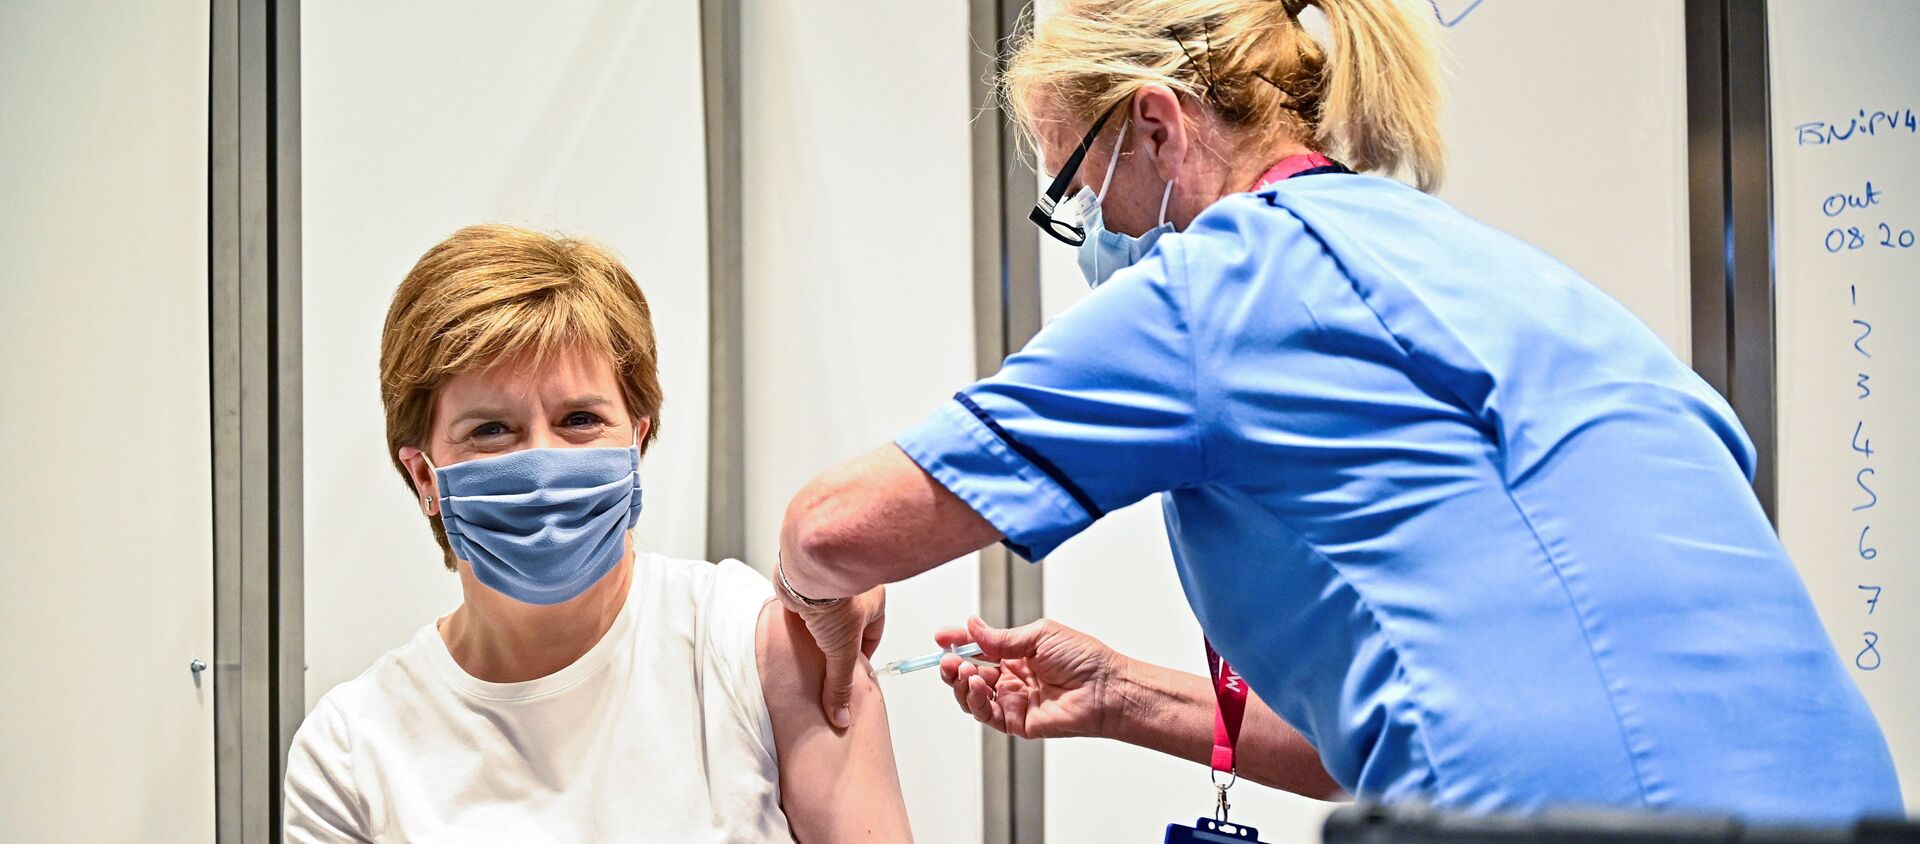 Scottish First Minister Nicola Sturgeon receives her second dose of the COVID-19 vaccine in Glasgow - Sputnik International, 1920